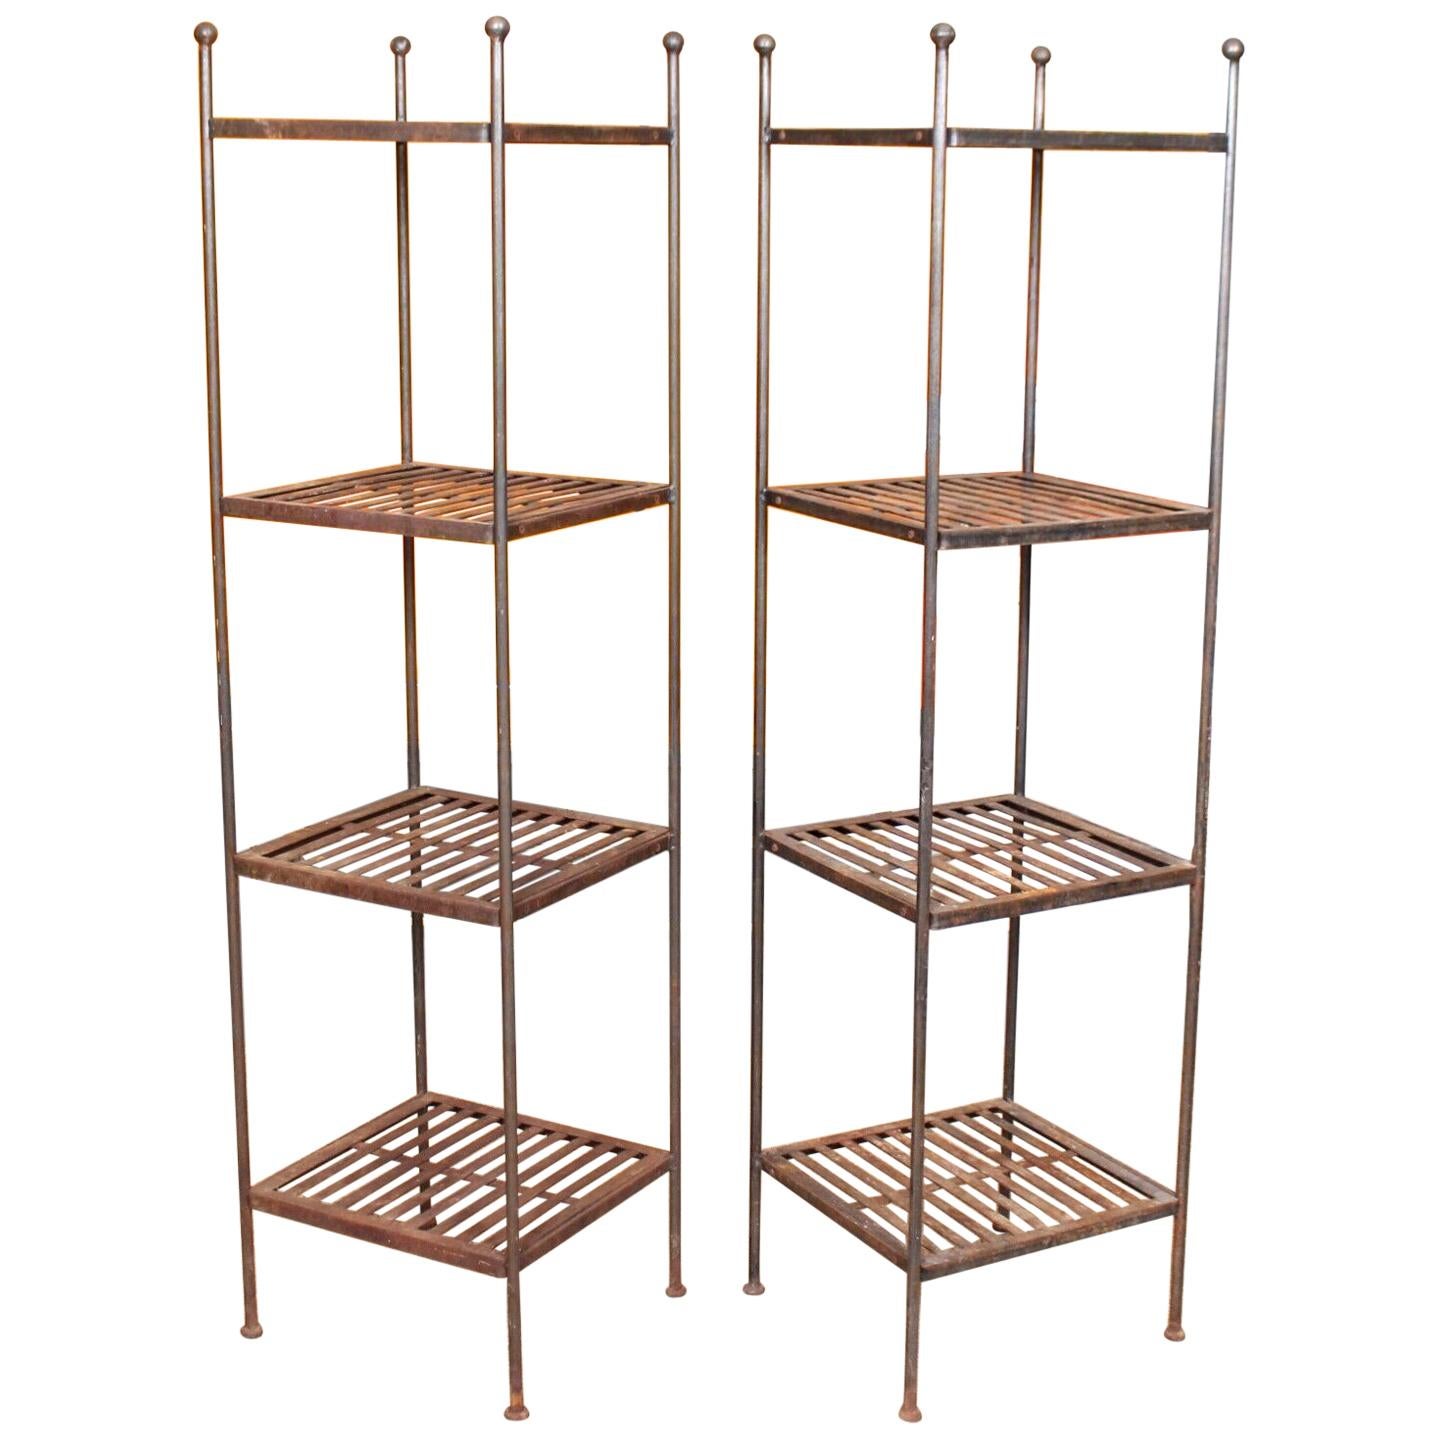 Pair of Tall Antique French Wrought Iron Étagère What Not Shelving Stands For Sale